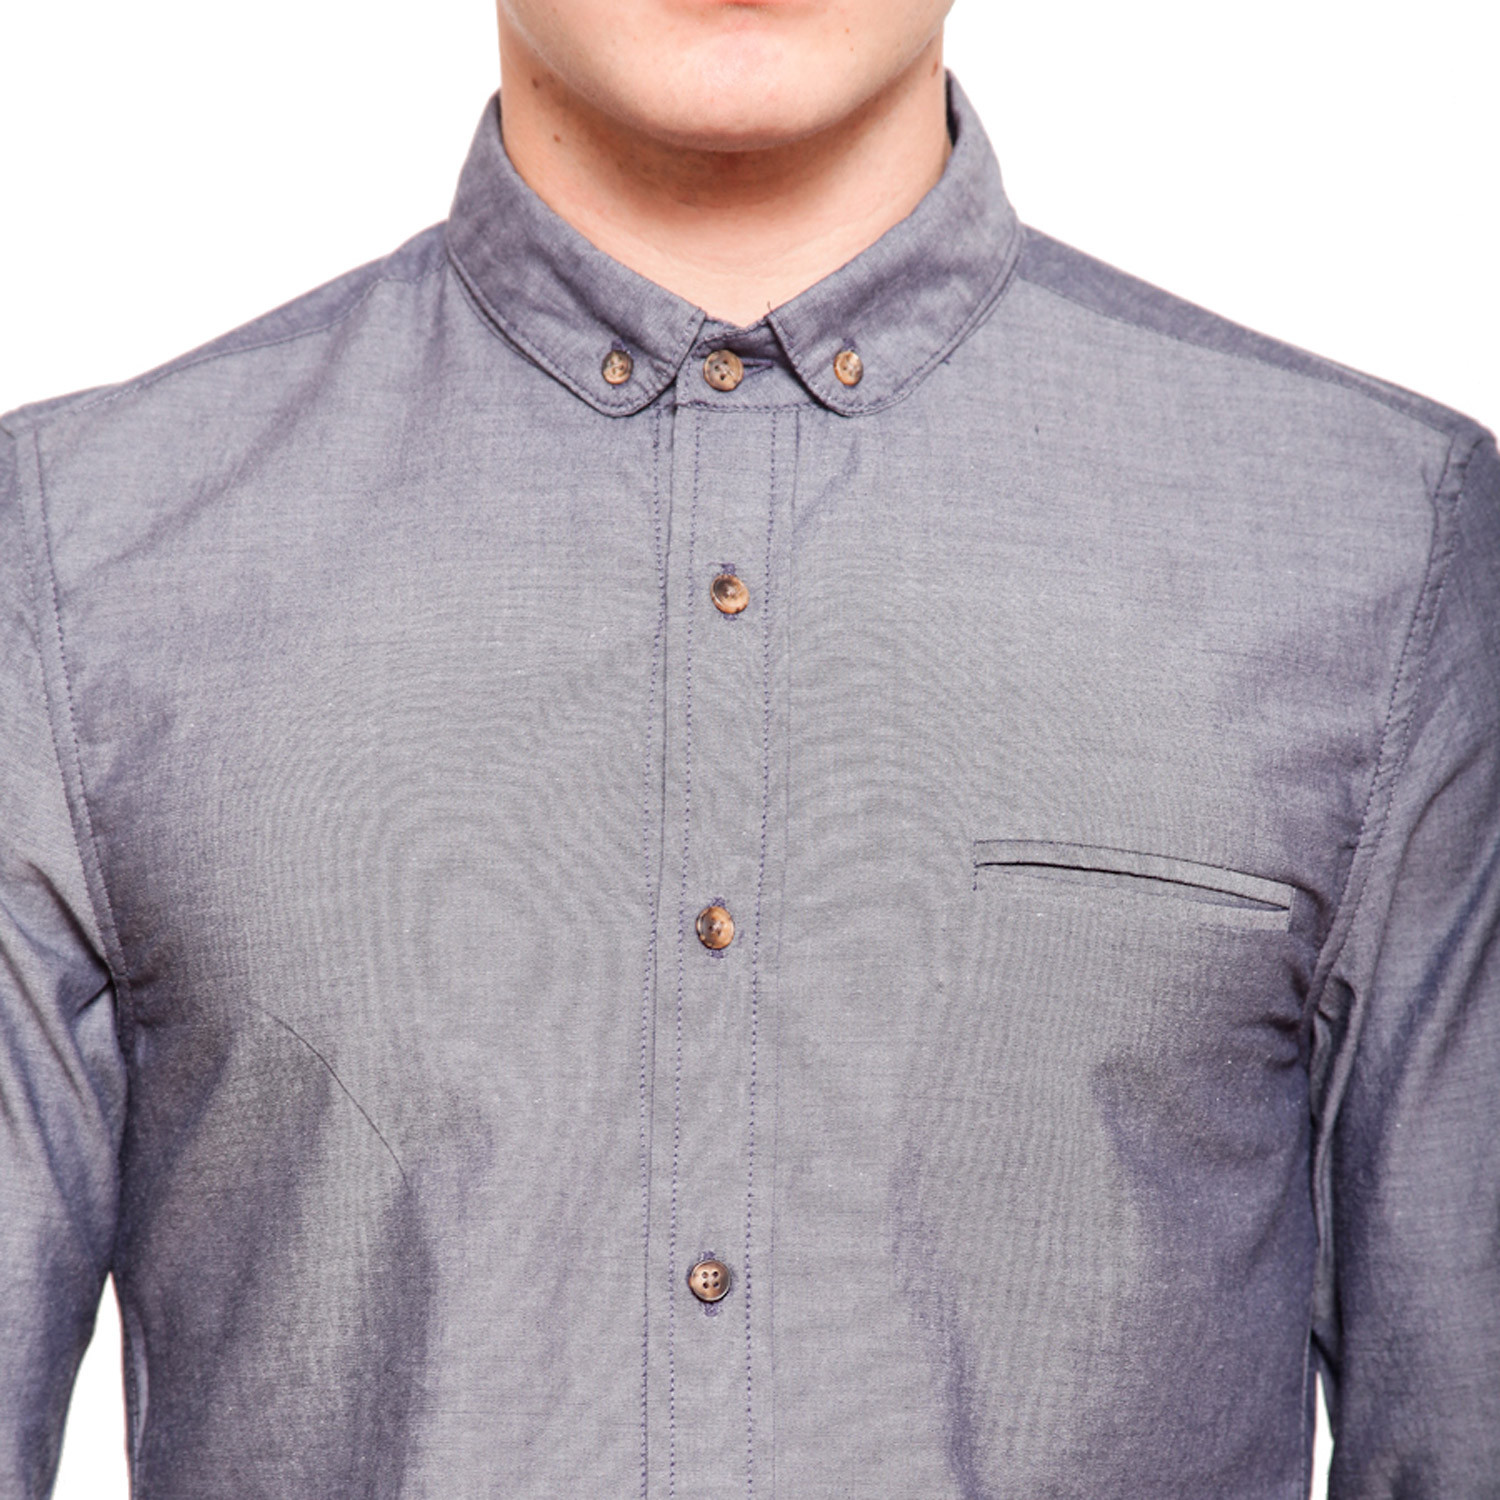 Club Collar Shirt // Navy Blue (S) - MENK Clothing - Touch of Modern